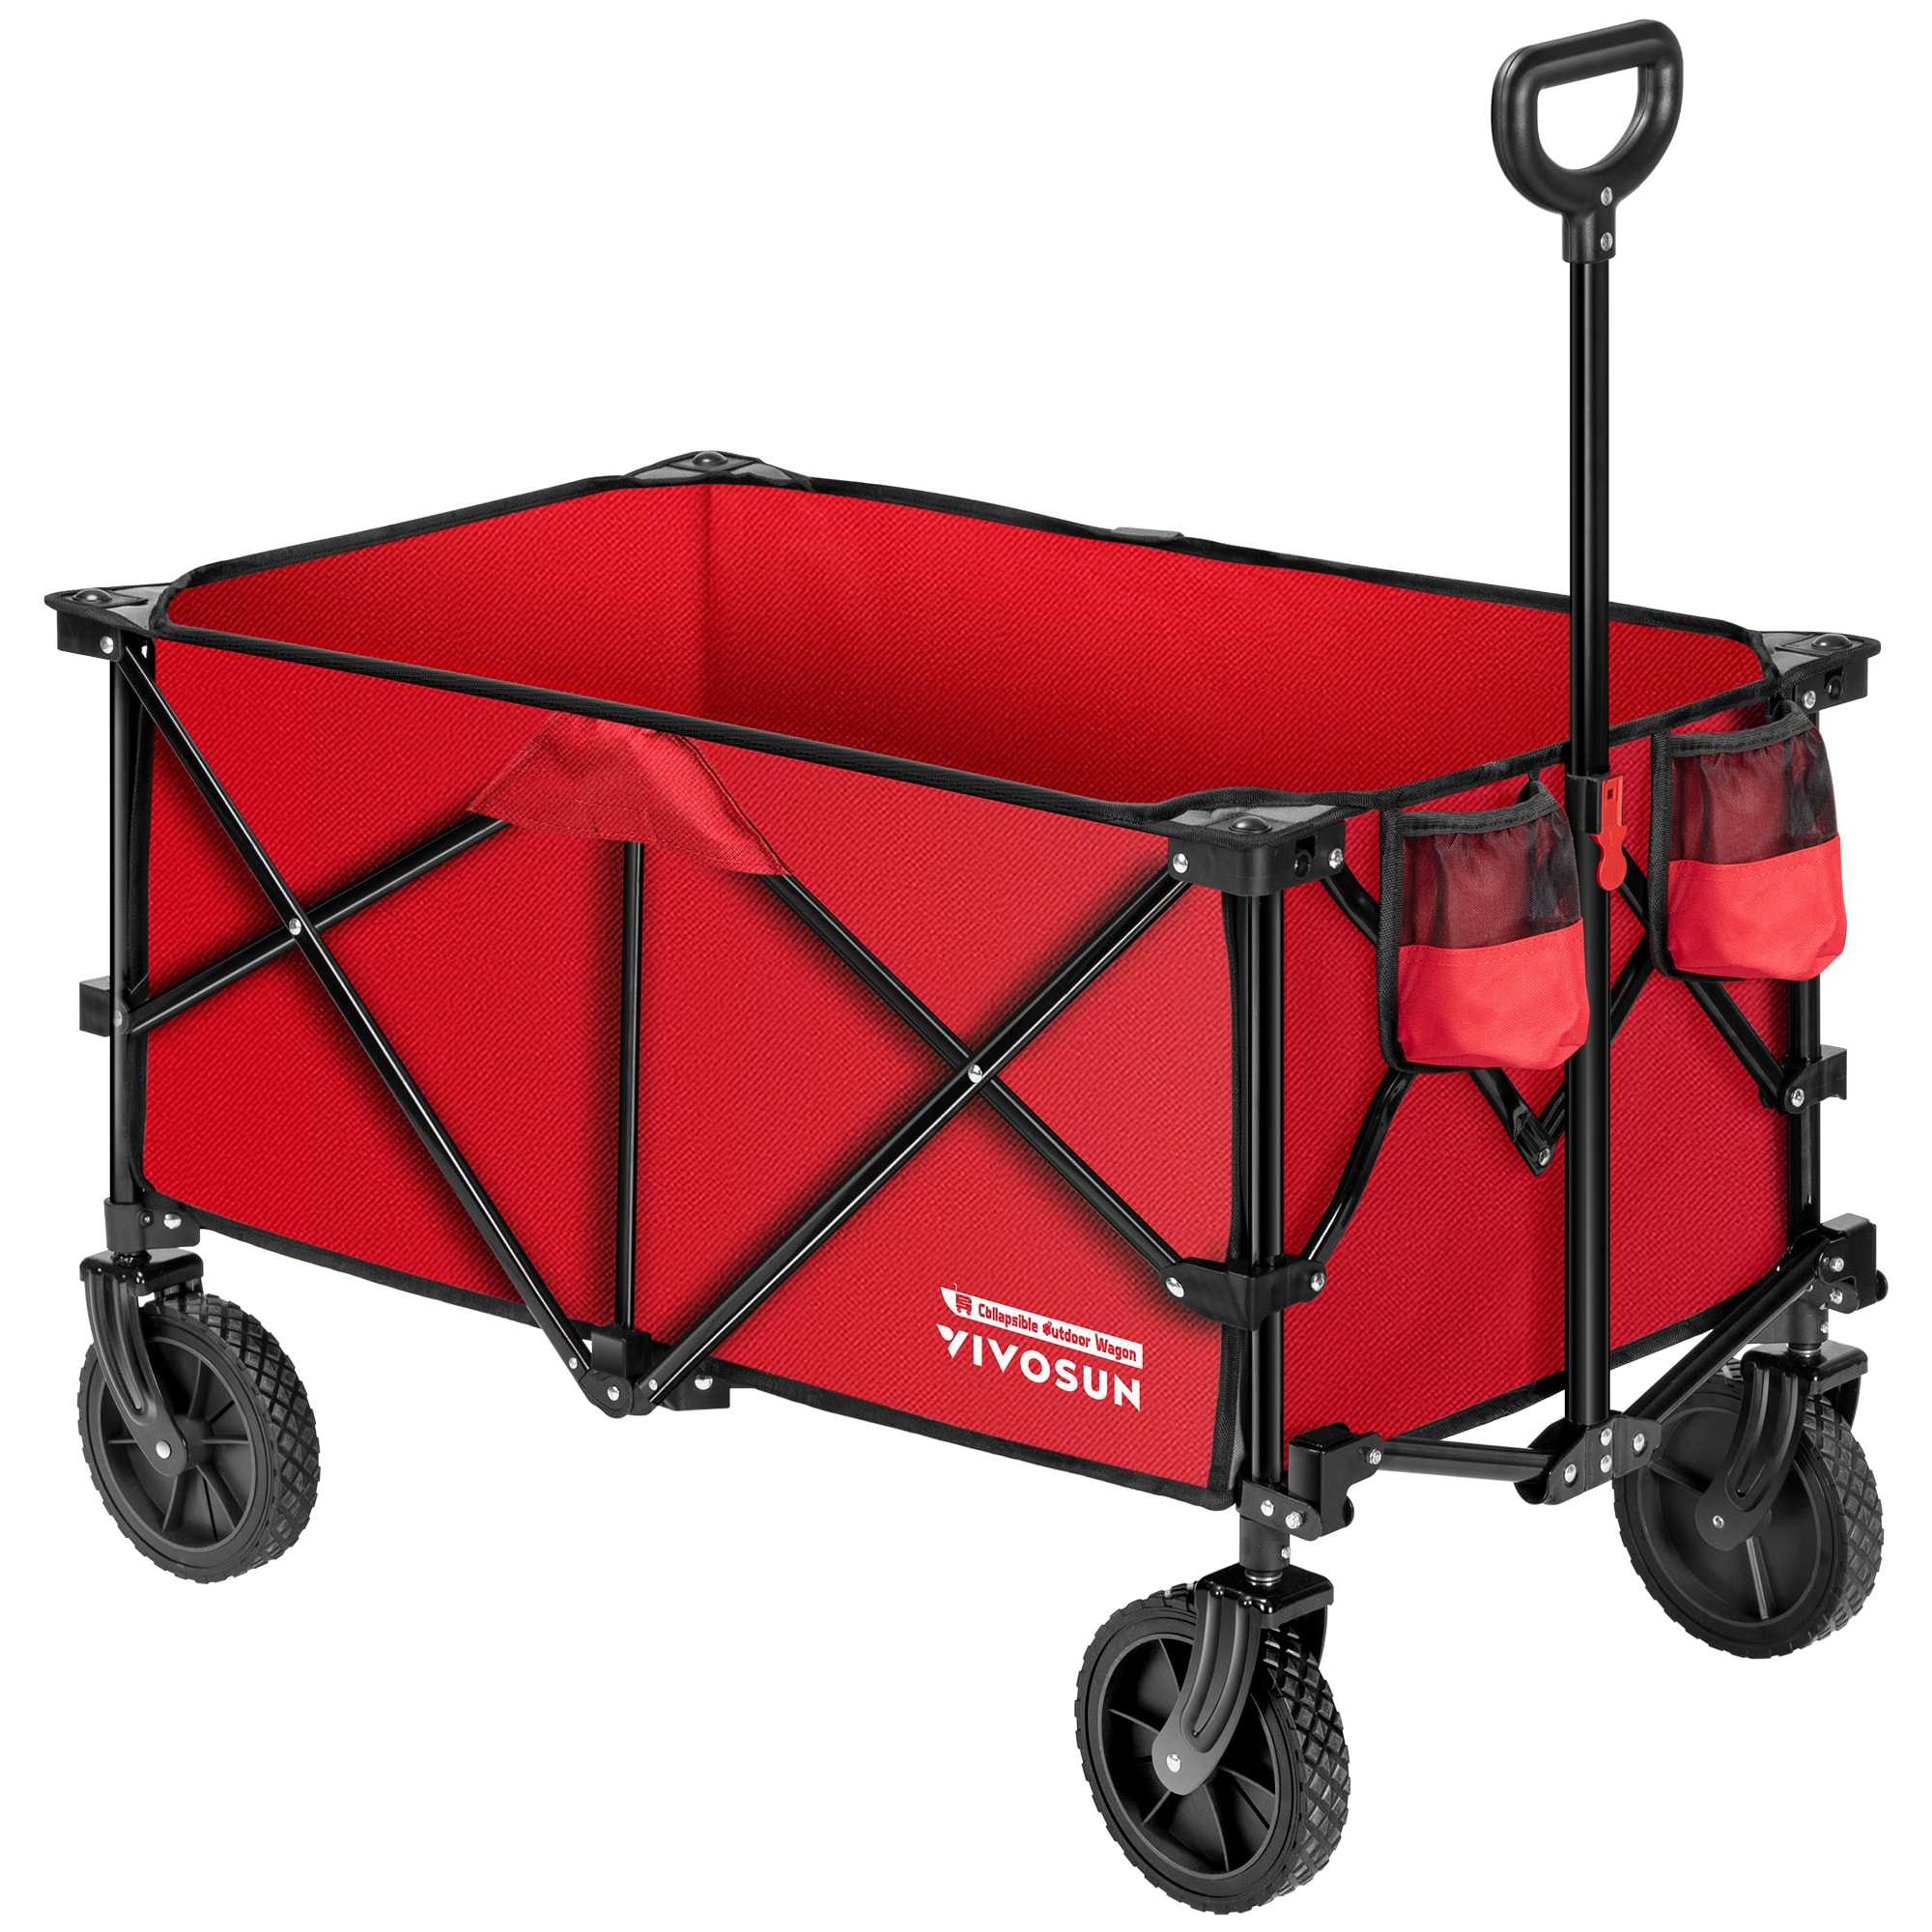 Load Capacity 175 LBS Collapsible Folding Outdoor Utility Wagon with Heavy Duty Pneumatic All Terrain Tires and Ball Bearings for Easy Mobility 